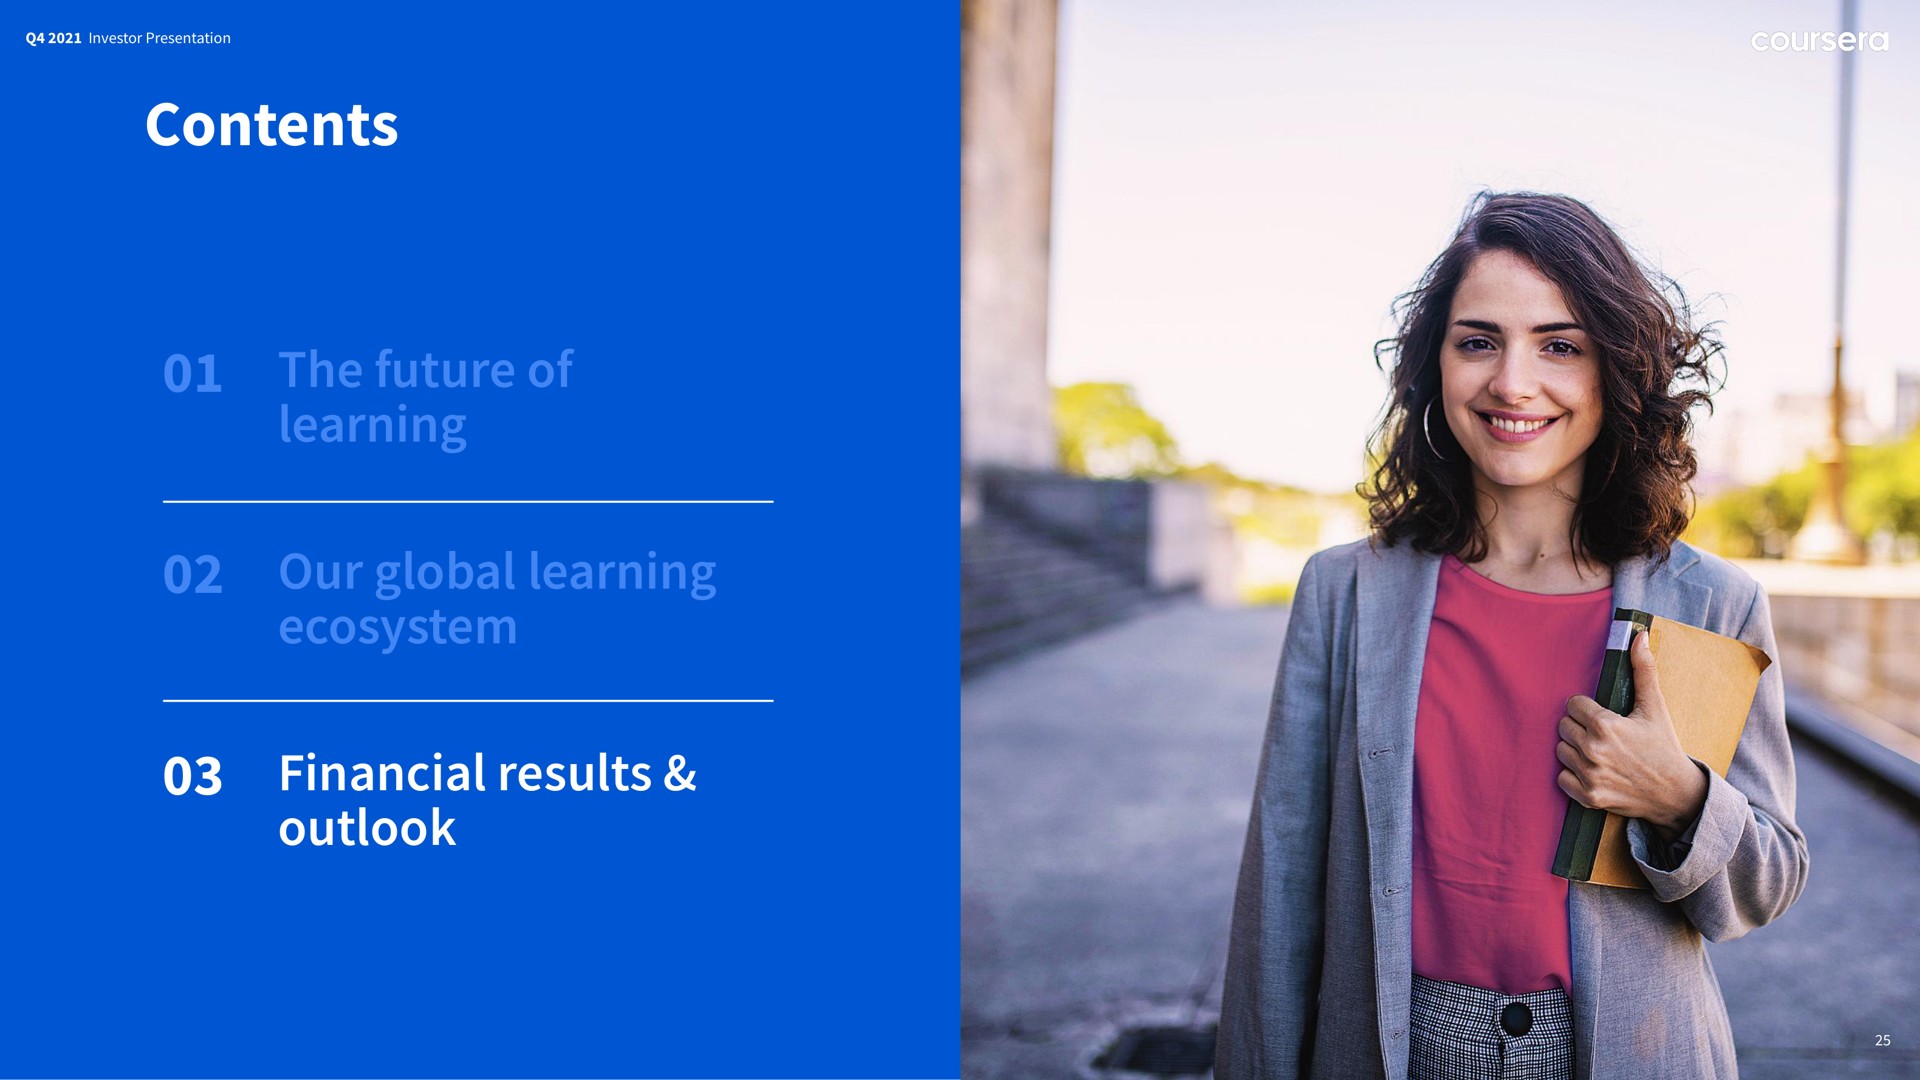 outlook financial results | Coursera